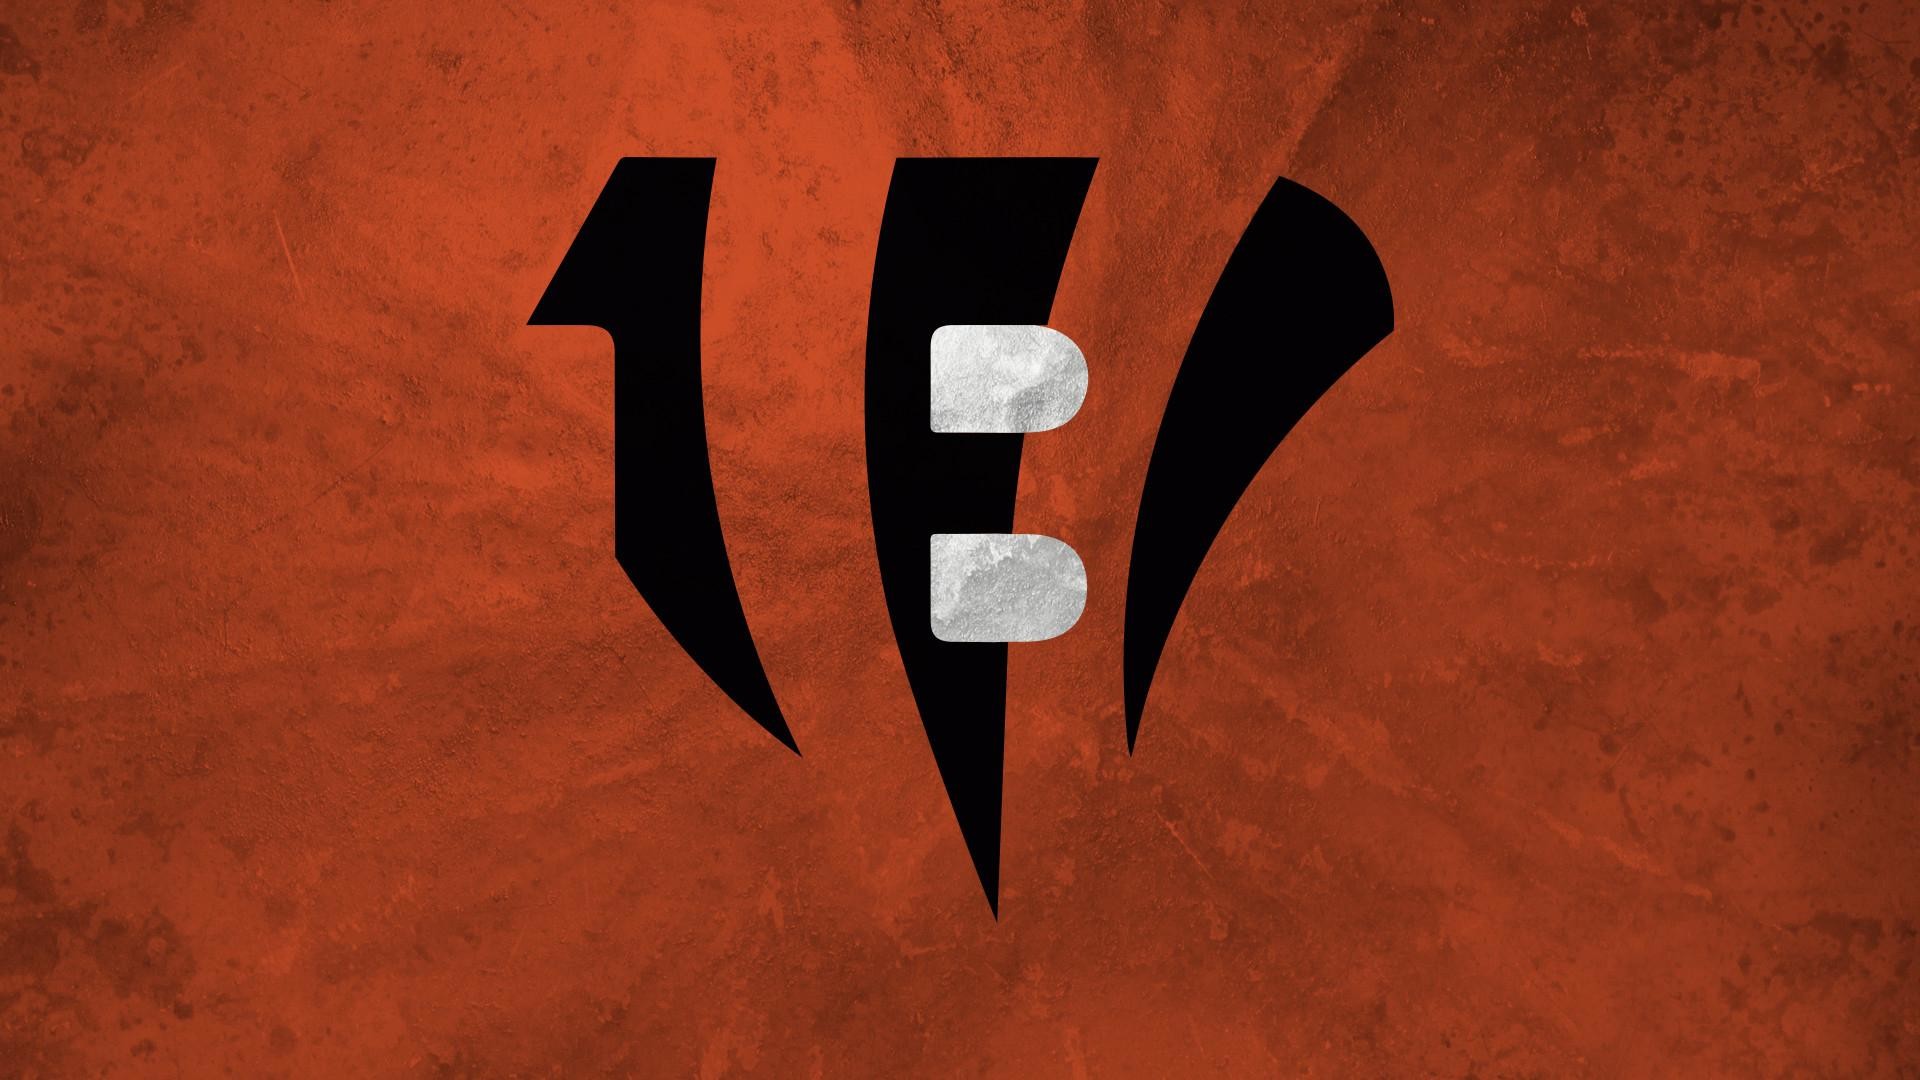 1920x1080 Great clean wallpaper of the Bengals logo. Bengals Logo Wallpapers Details  Player: Bengals Logo [ The Roosevelts ]